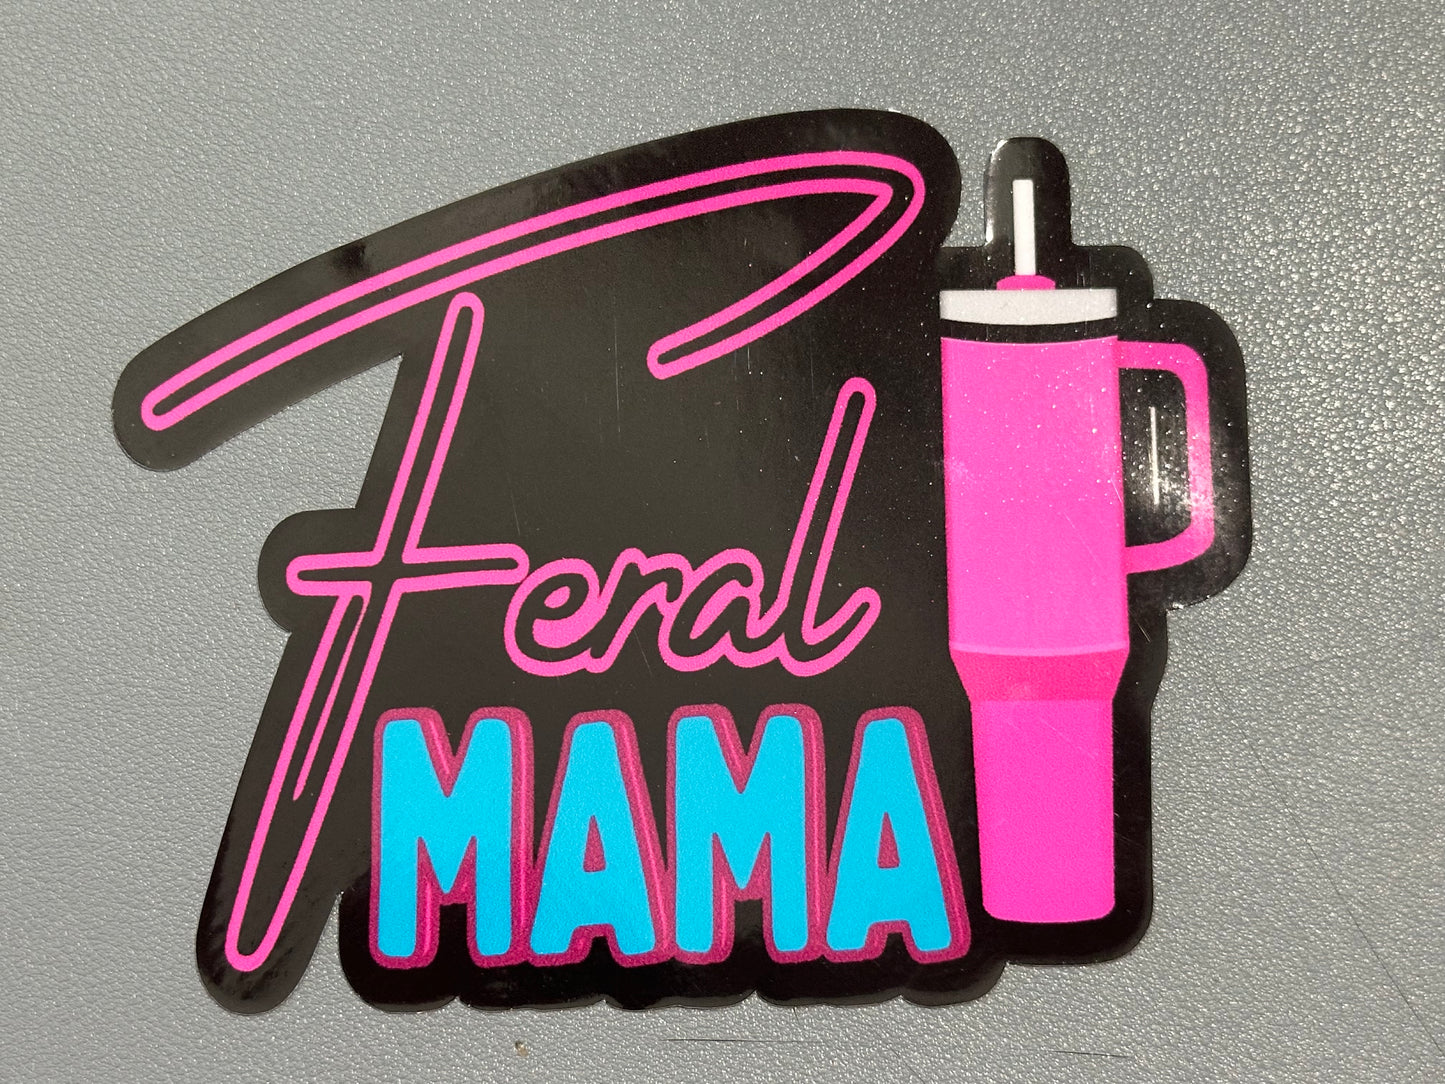 Feral mama cup vinyl decal 5x4 inches